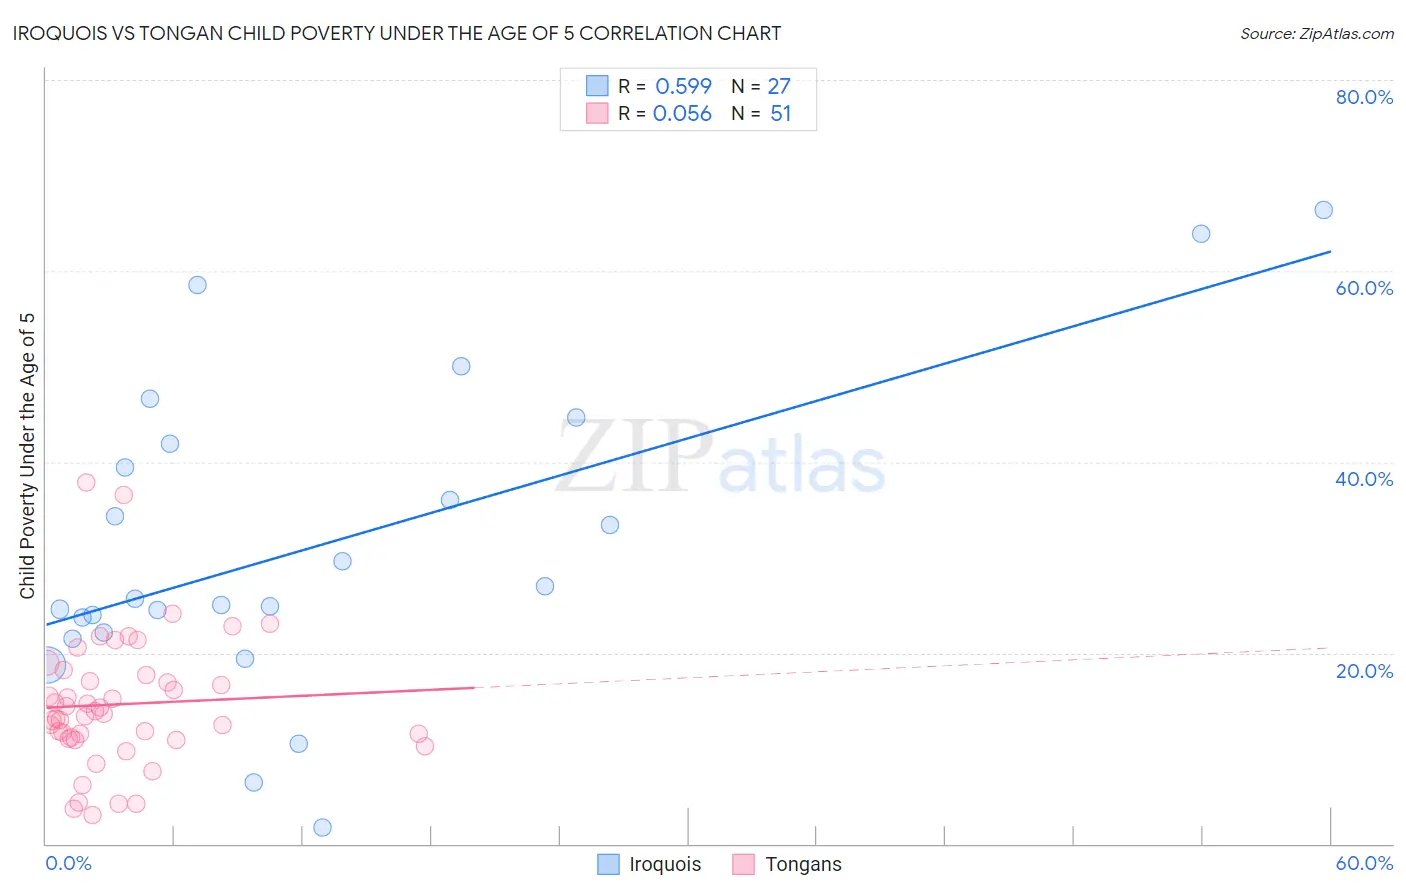 Iroquois vs Tongan Child Poverty Under the Age of 5